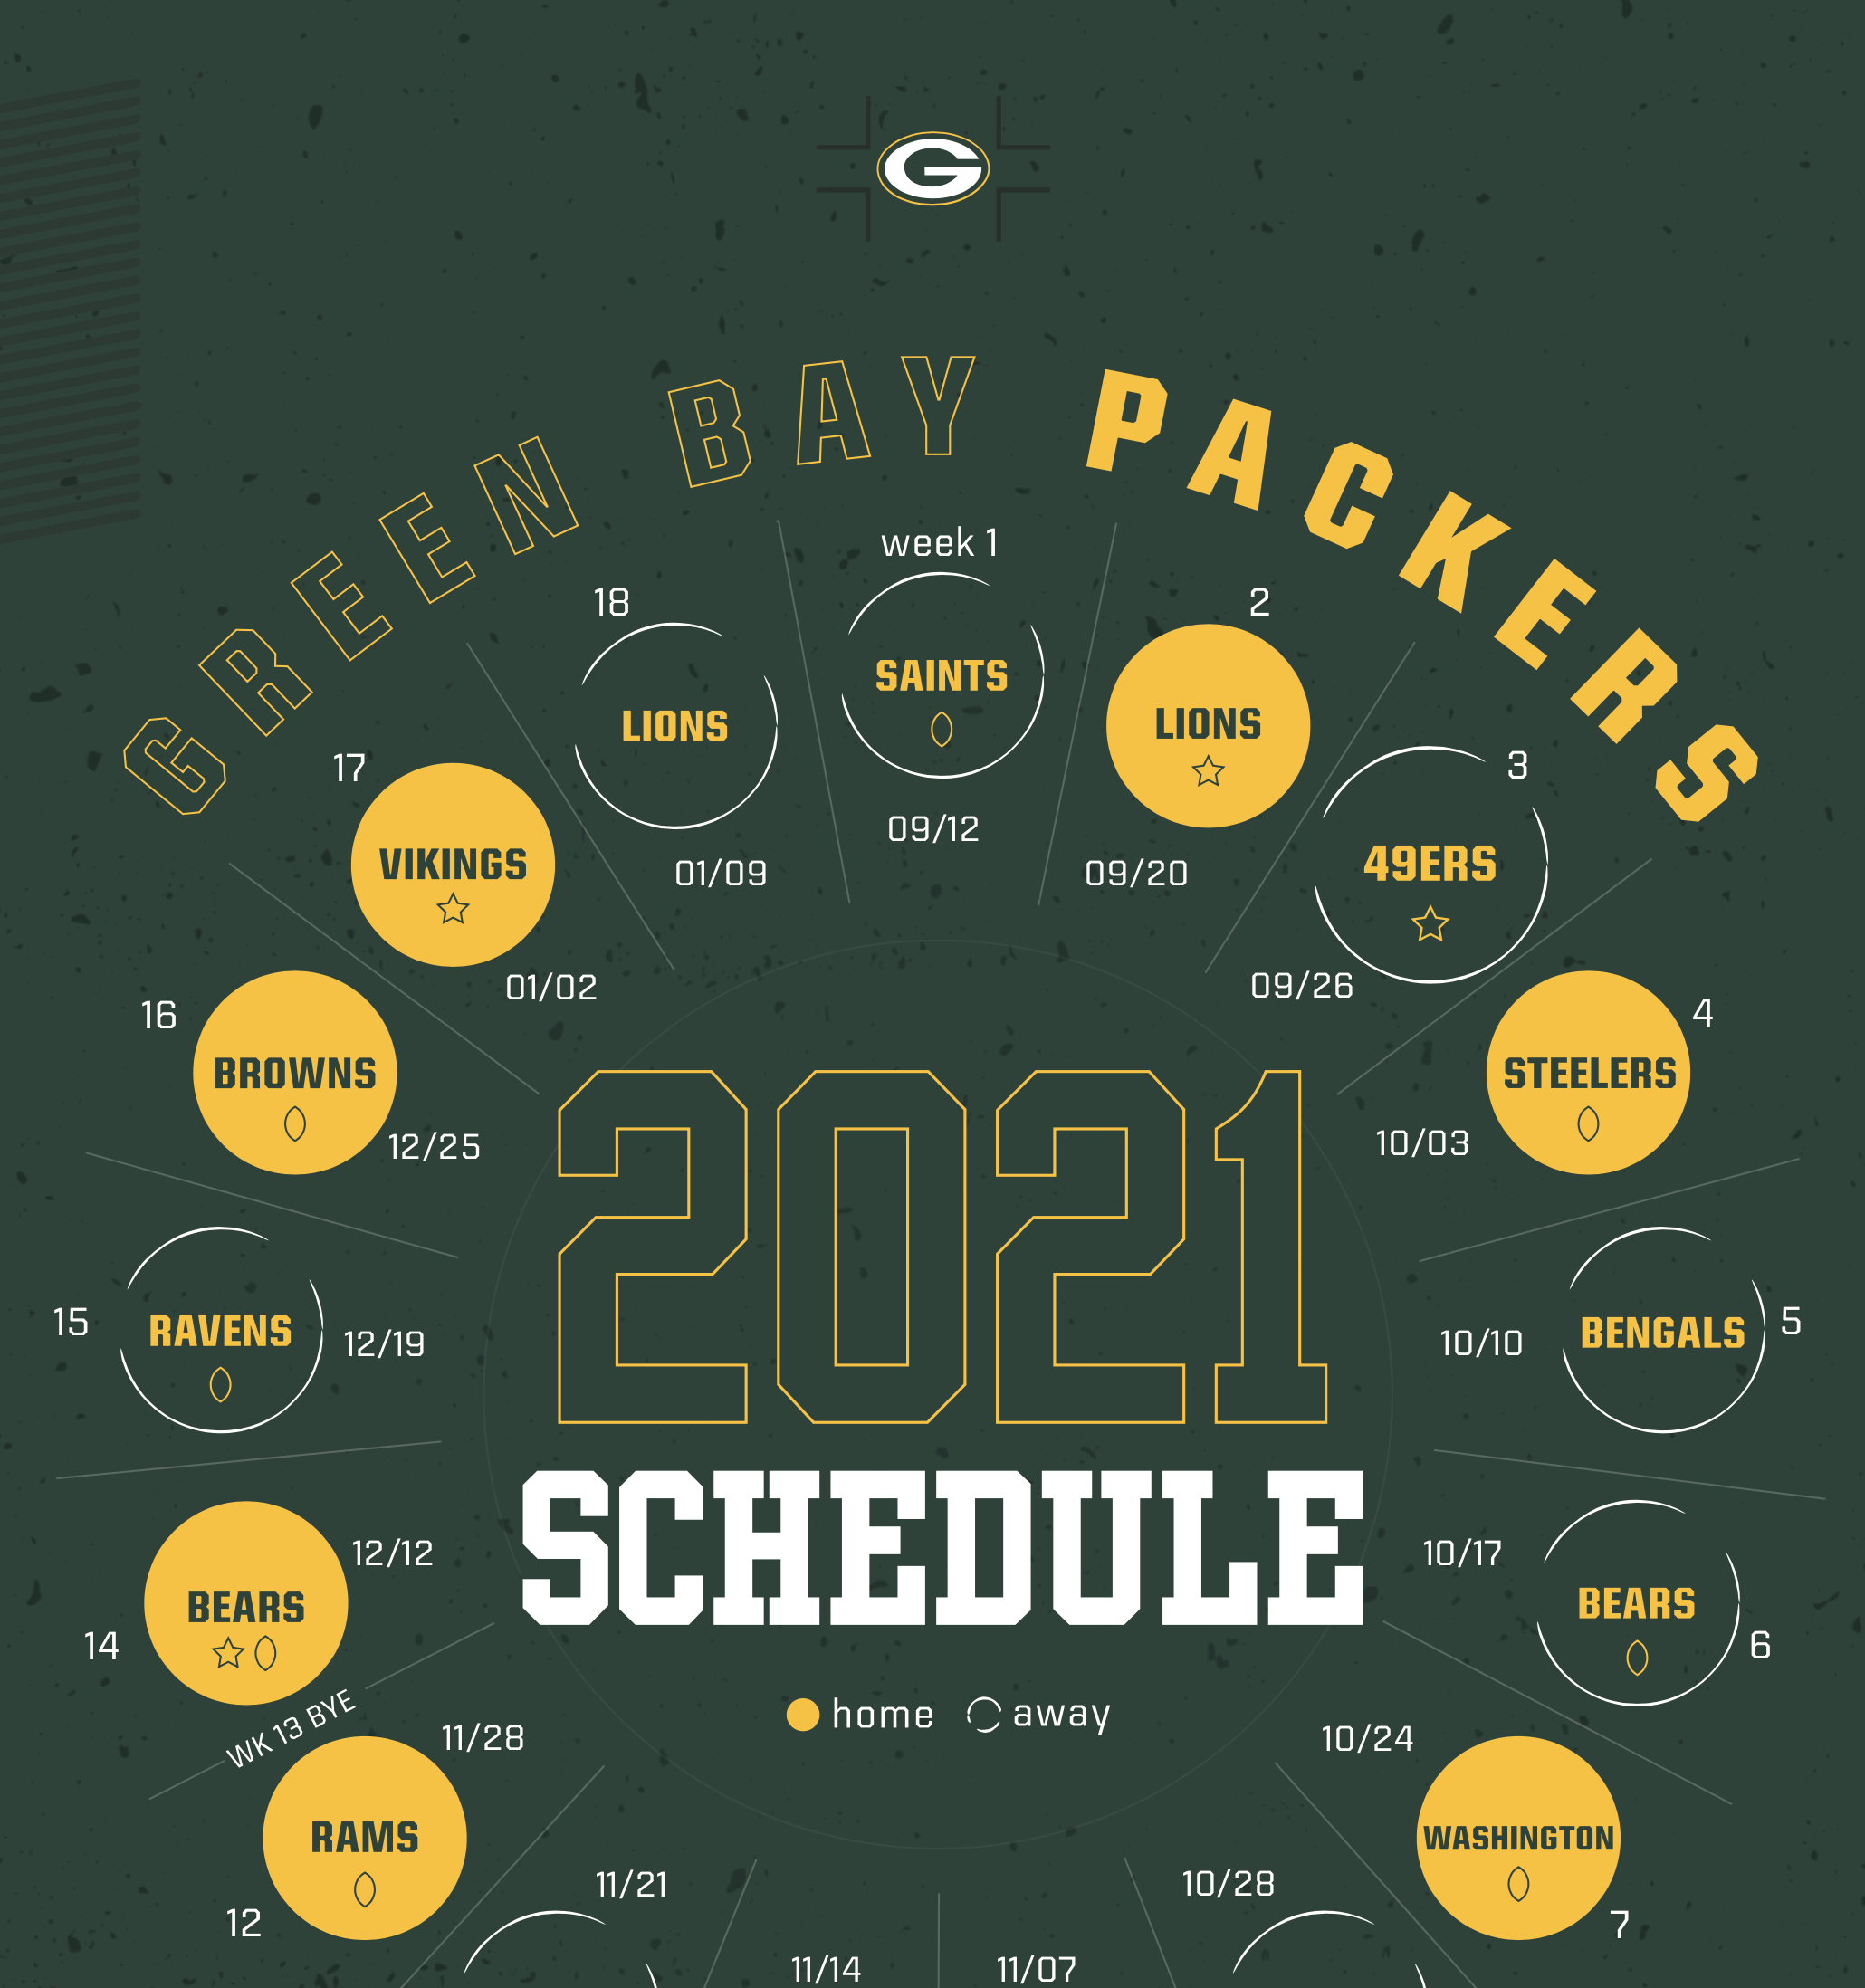 Infographic: 100 Seasons of Packers uniforms